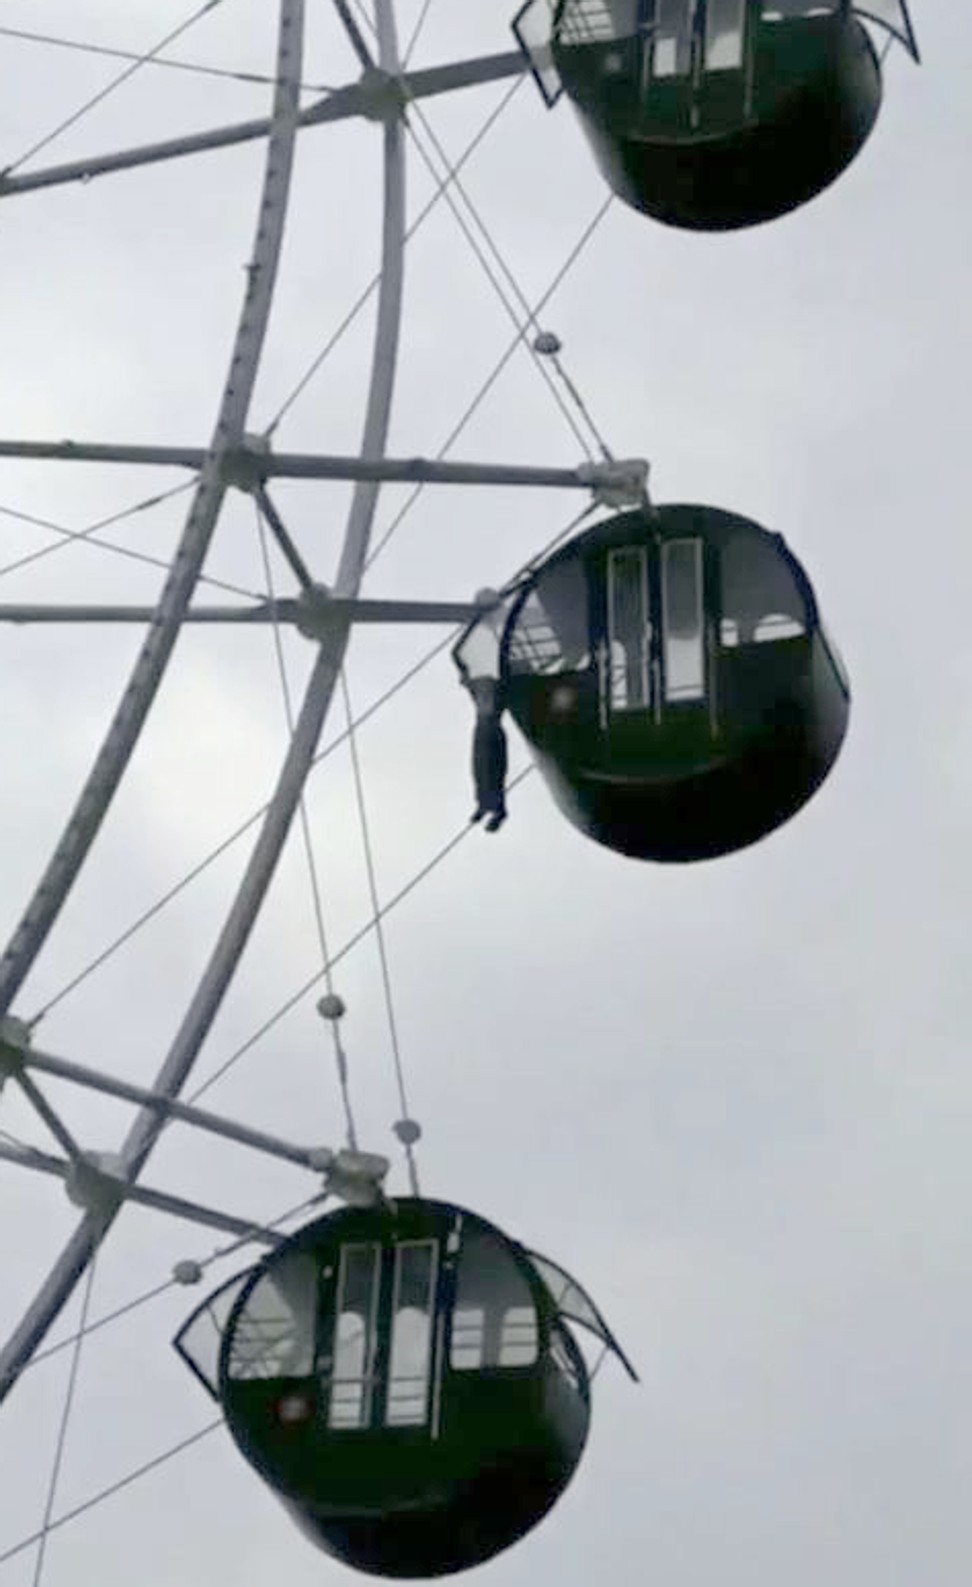 Ride operators worked to bring the carriage safely to the ground so they could release the child, who was crying uncontrollably, out of his trapped position on the Ferris wheel in Zhejiang province, China.Photo: Sina